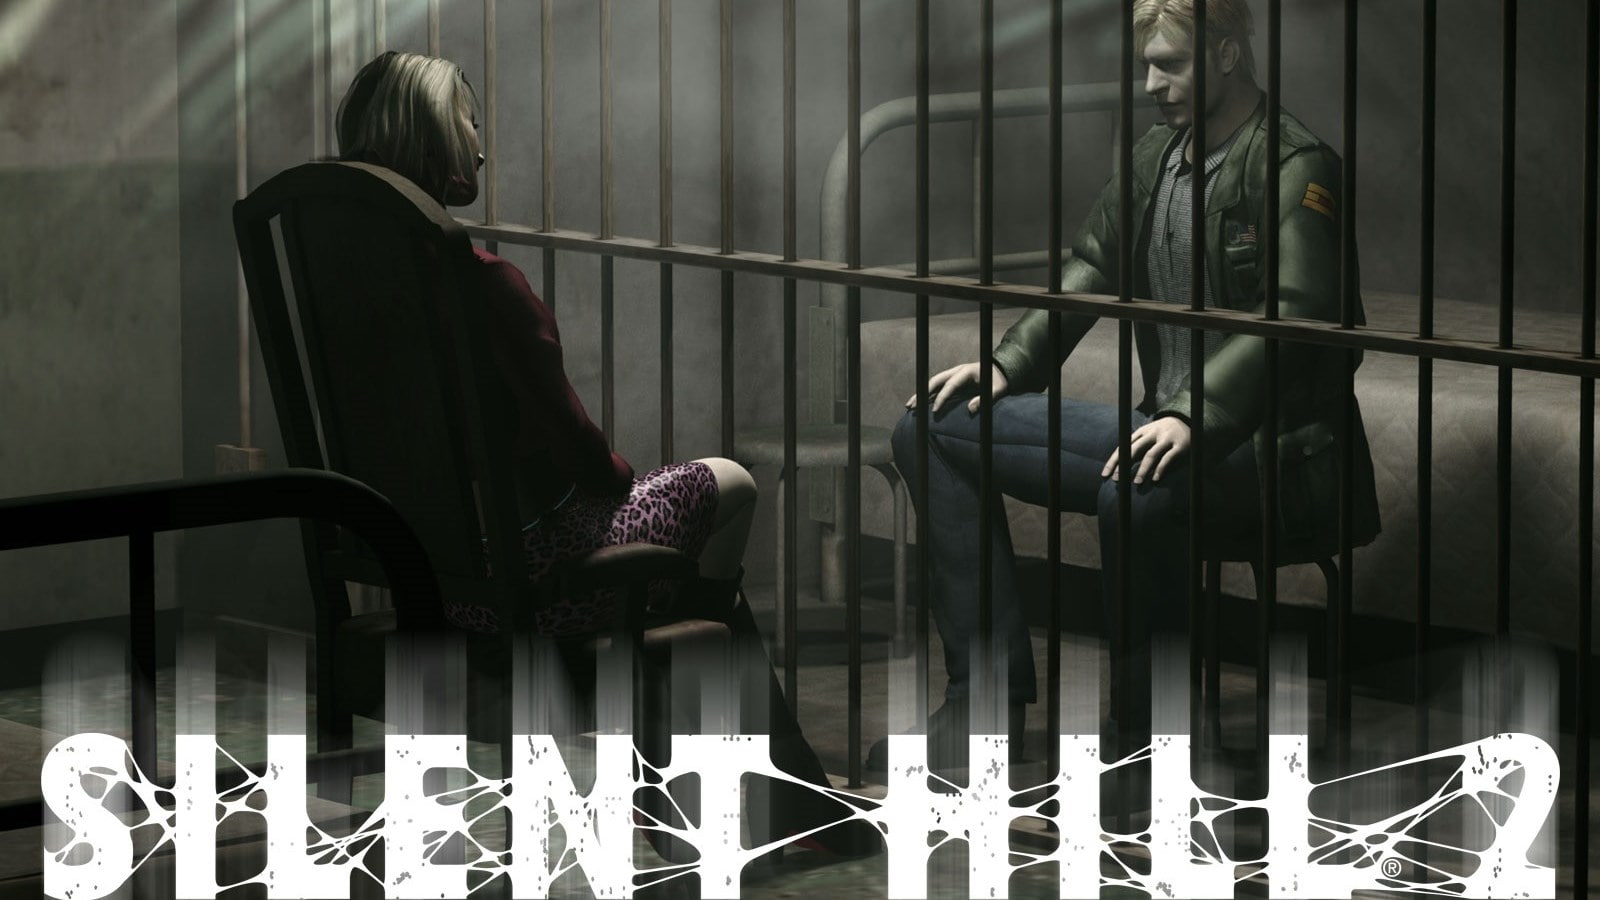 silent hill 2, sitting, adult, railing, real people, women